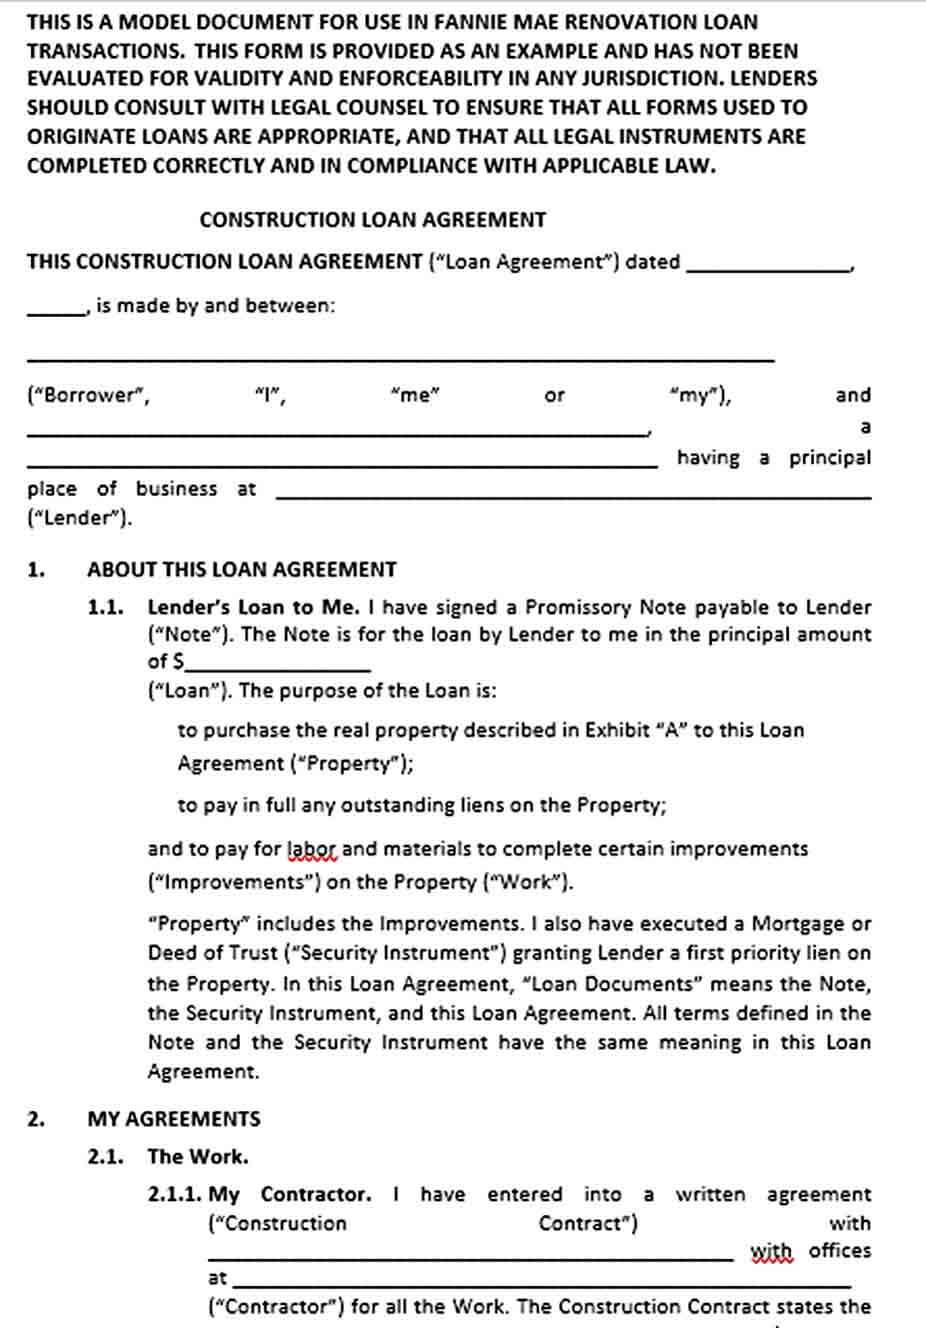 Sample Renovation And Construction Loan Agreement Template